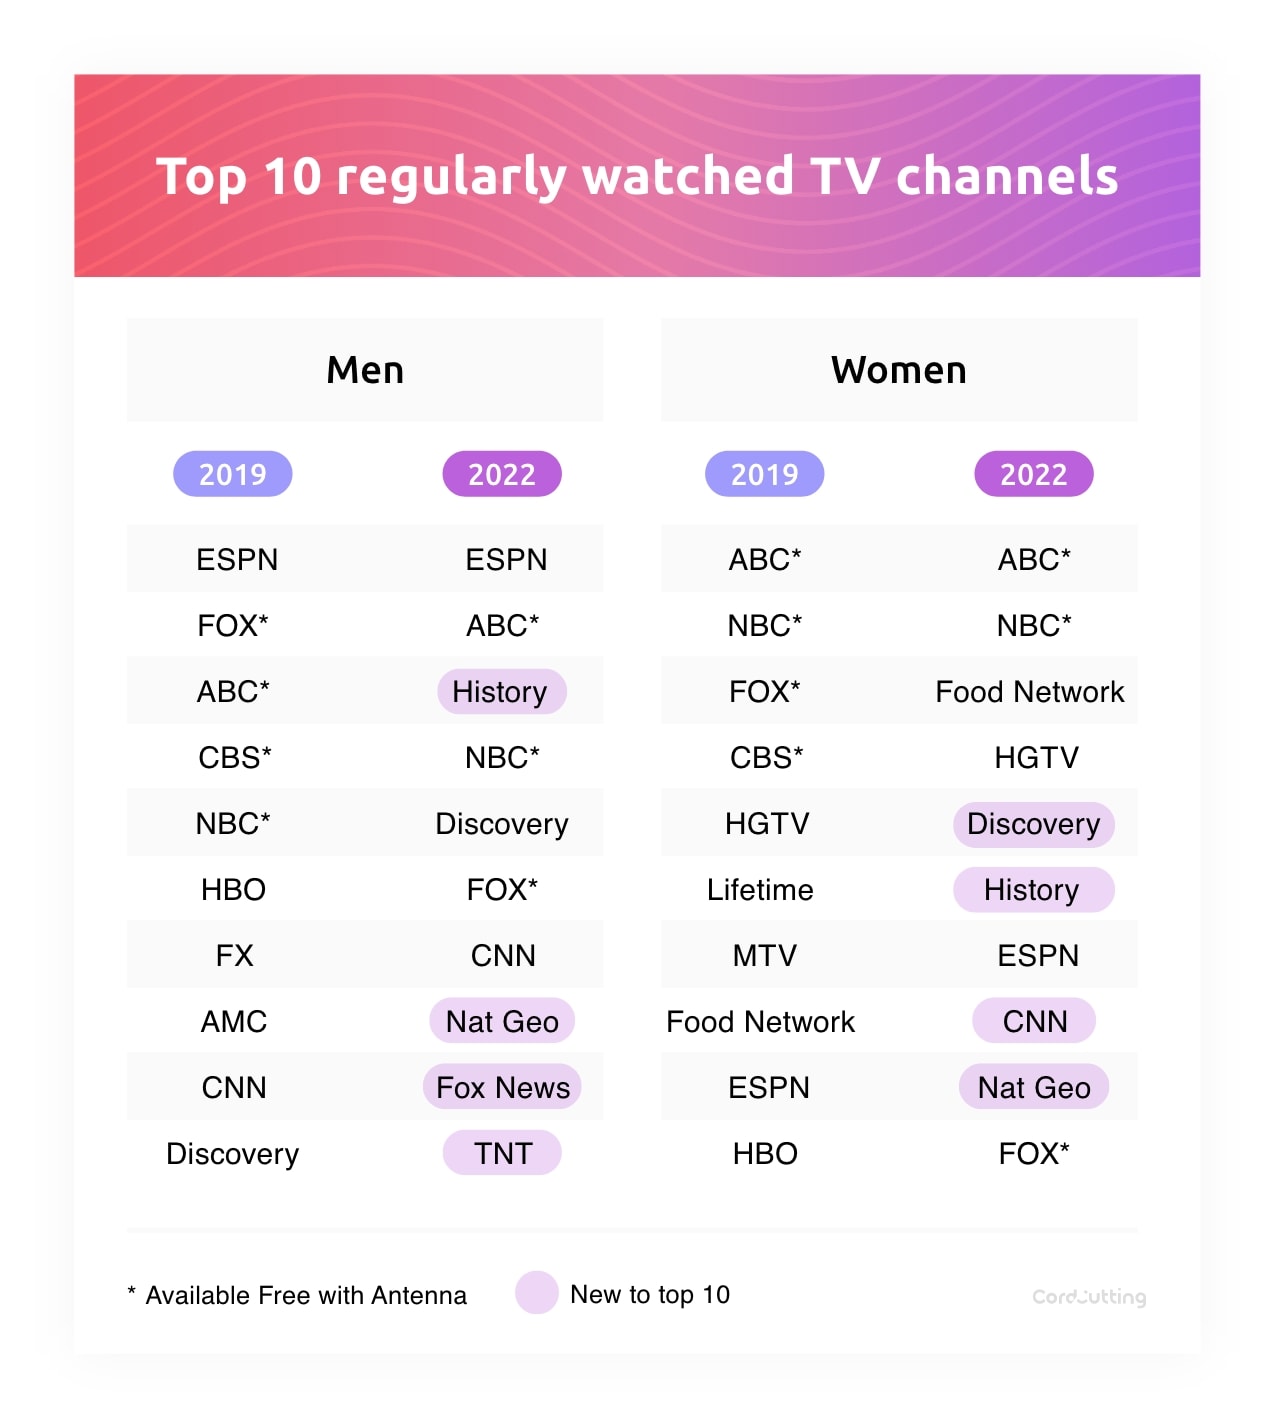 top 10 regularly watched channels